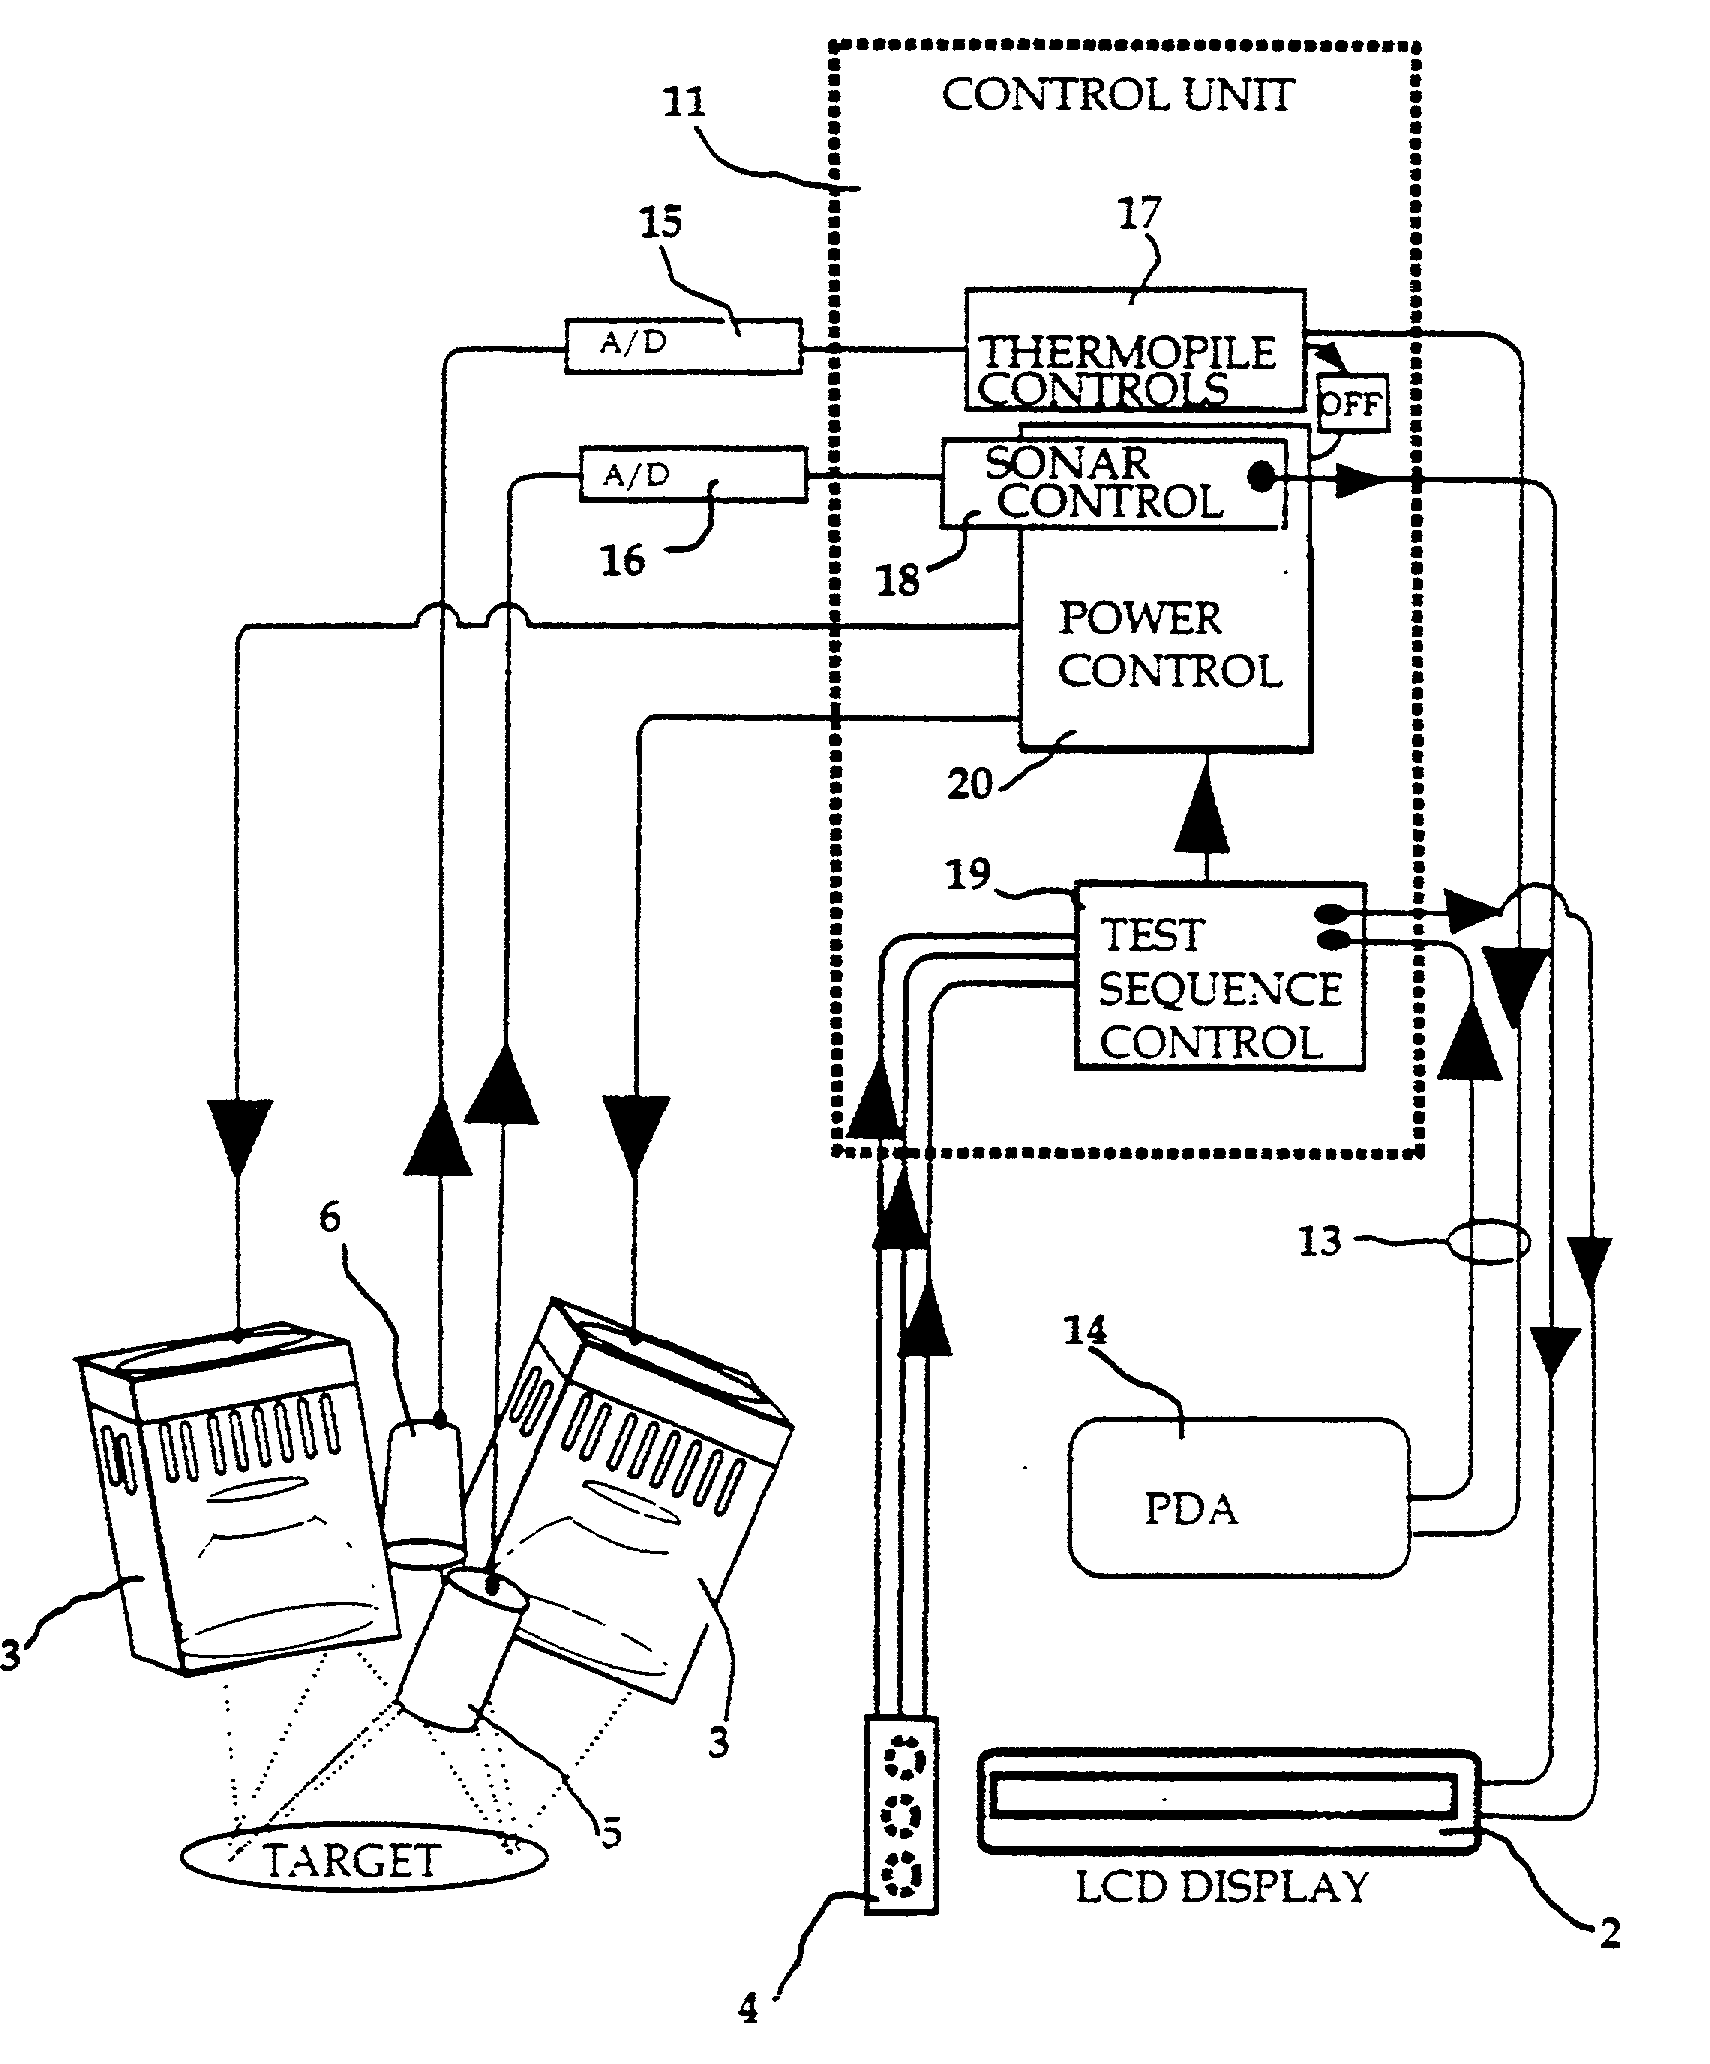 Sonar-controlled apparatus for the delivery of electromagnetic radiation